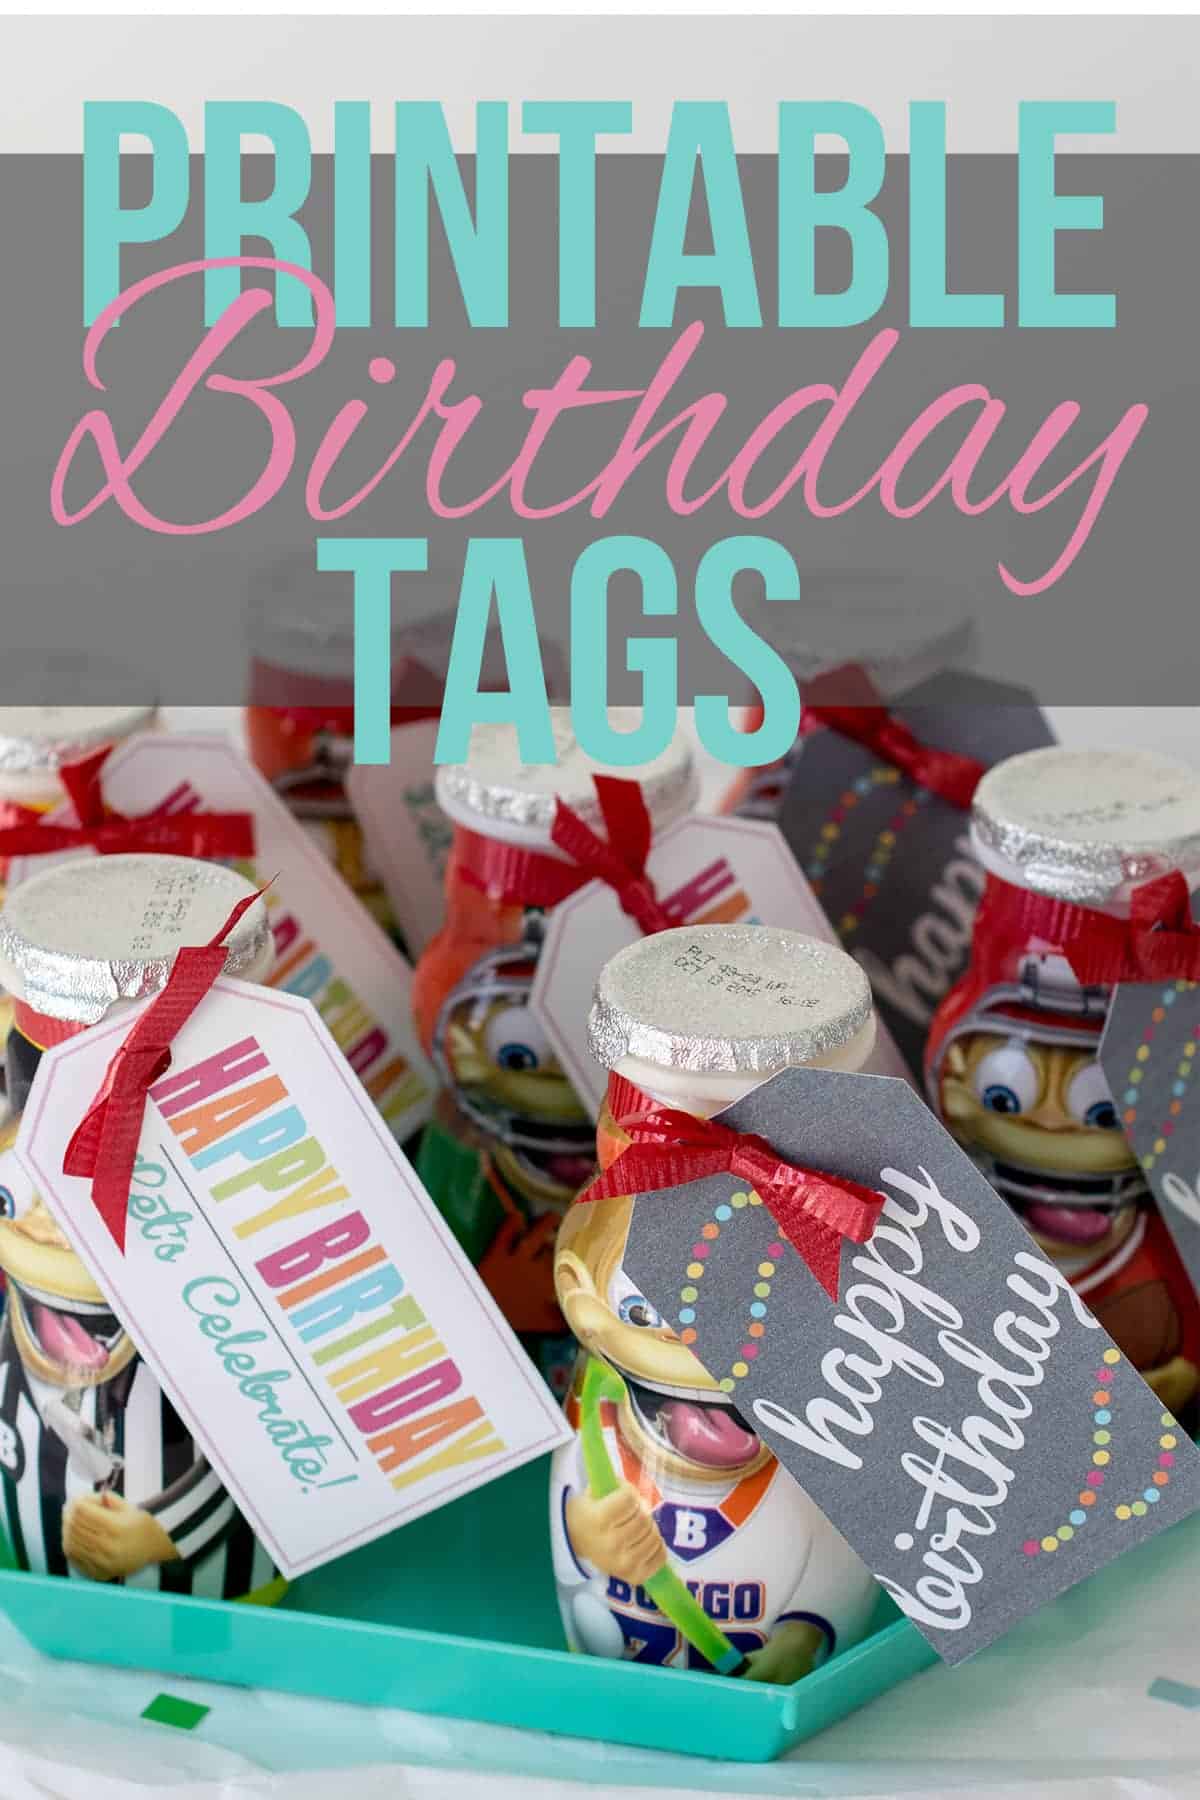 Classroom birthday treats-yogurt smoothie treats on turquoise hexagonal tray, wrapped in red bows with printable labels on white surface with colored confetti. 